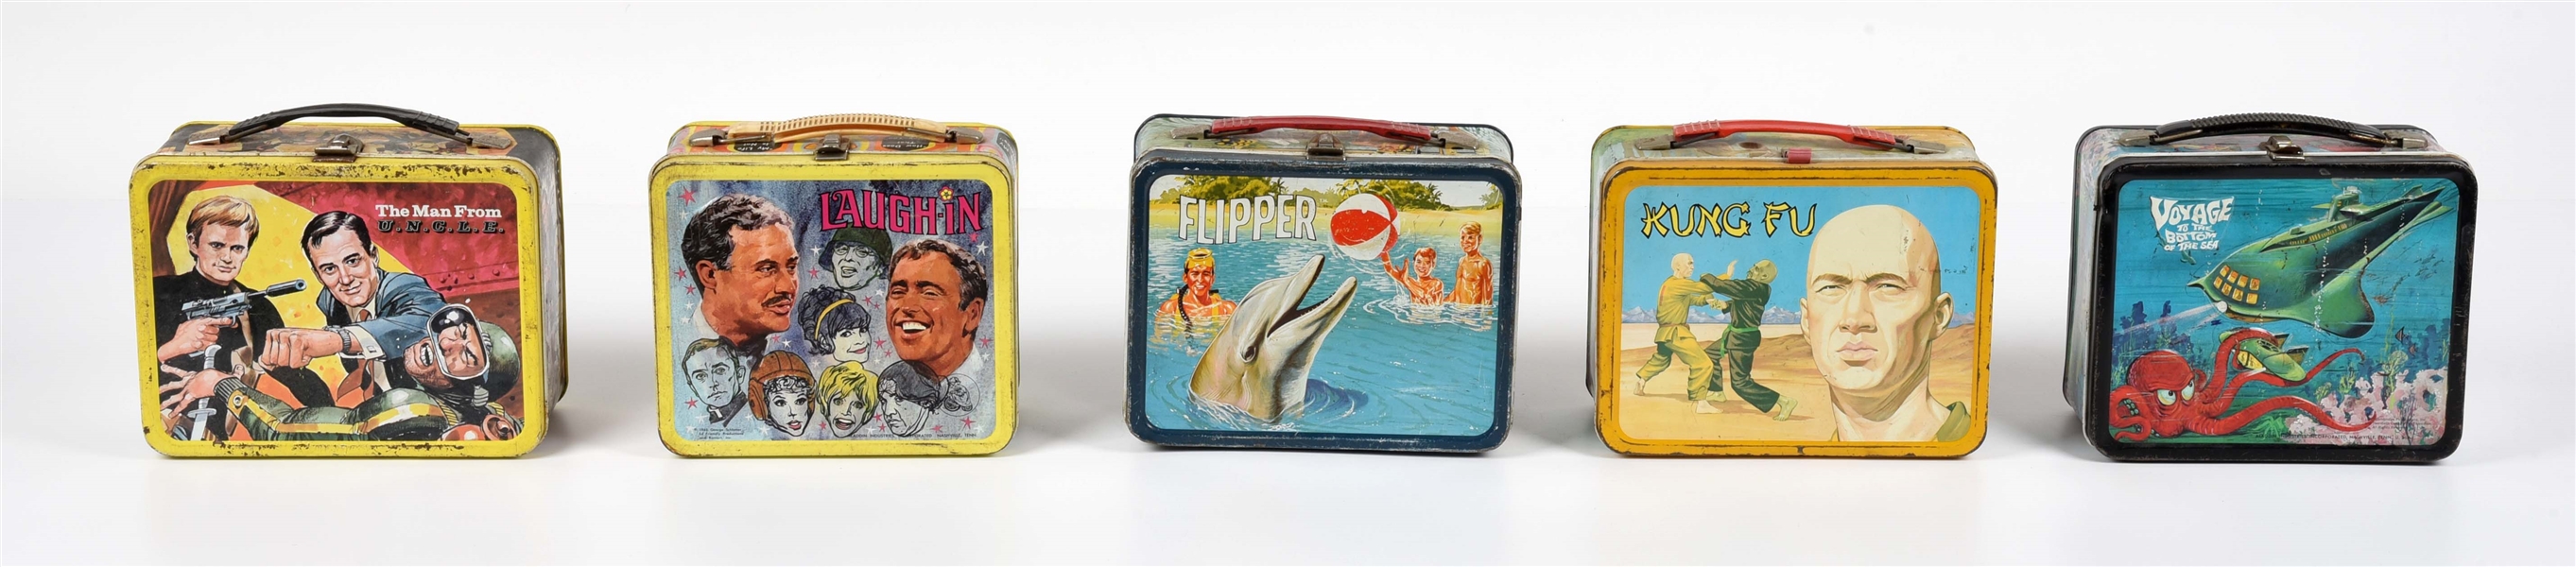 LOT OF 5: VARIOUS 1960S & 1970S TV-THEMED LUNCHBOXES.